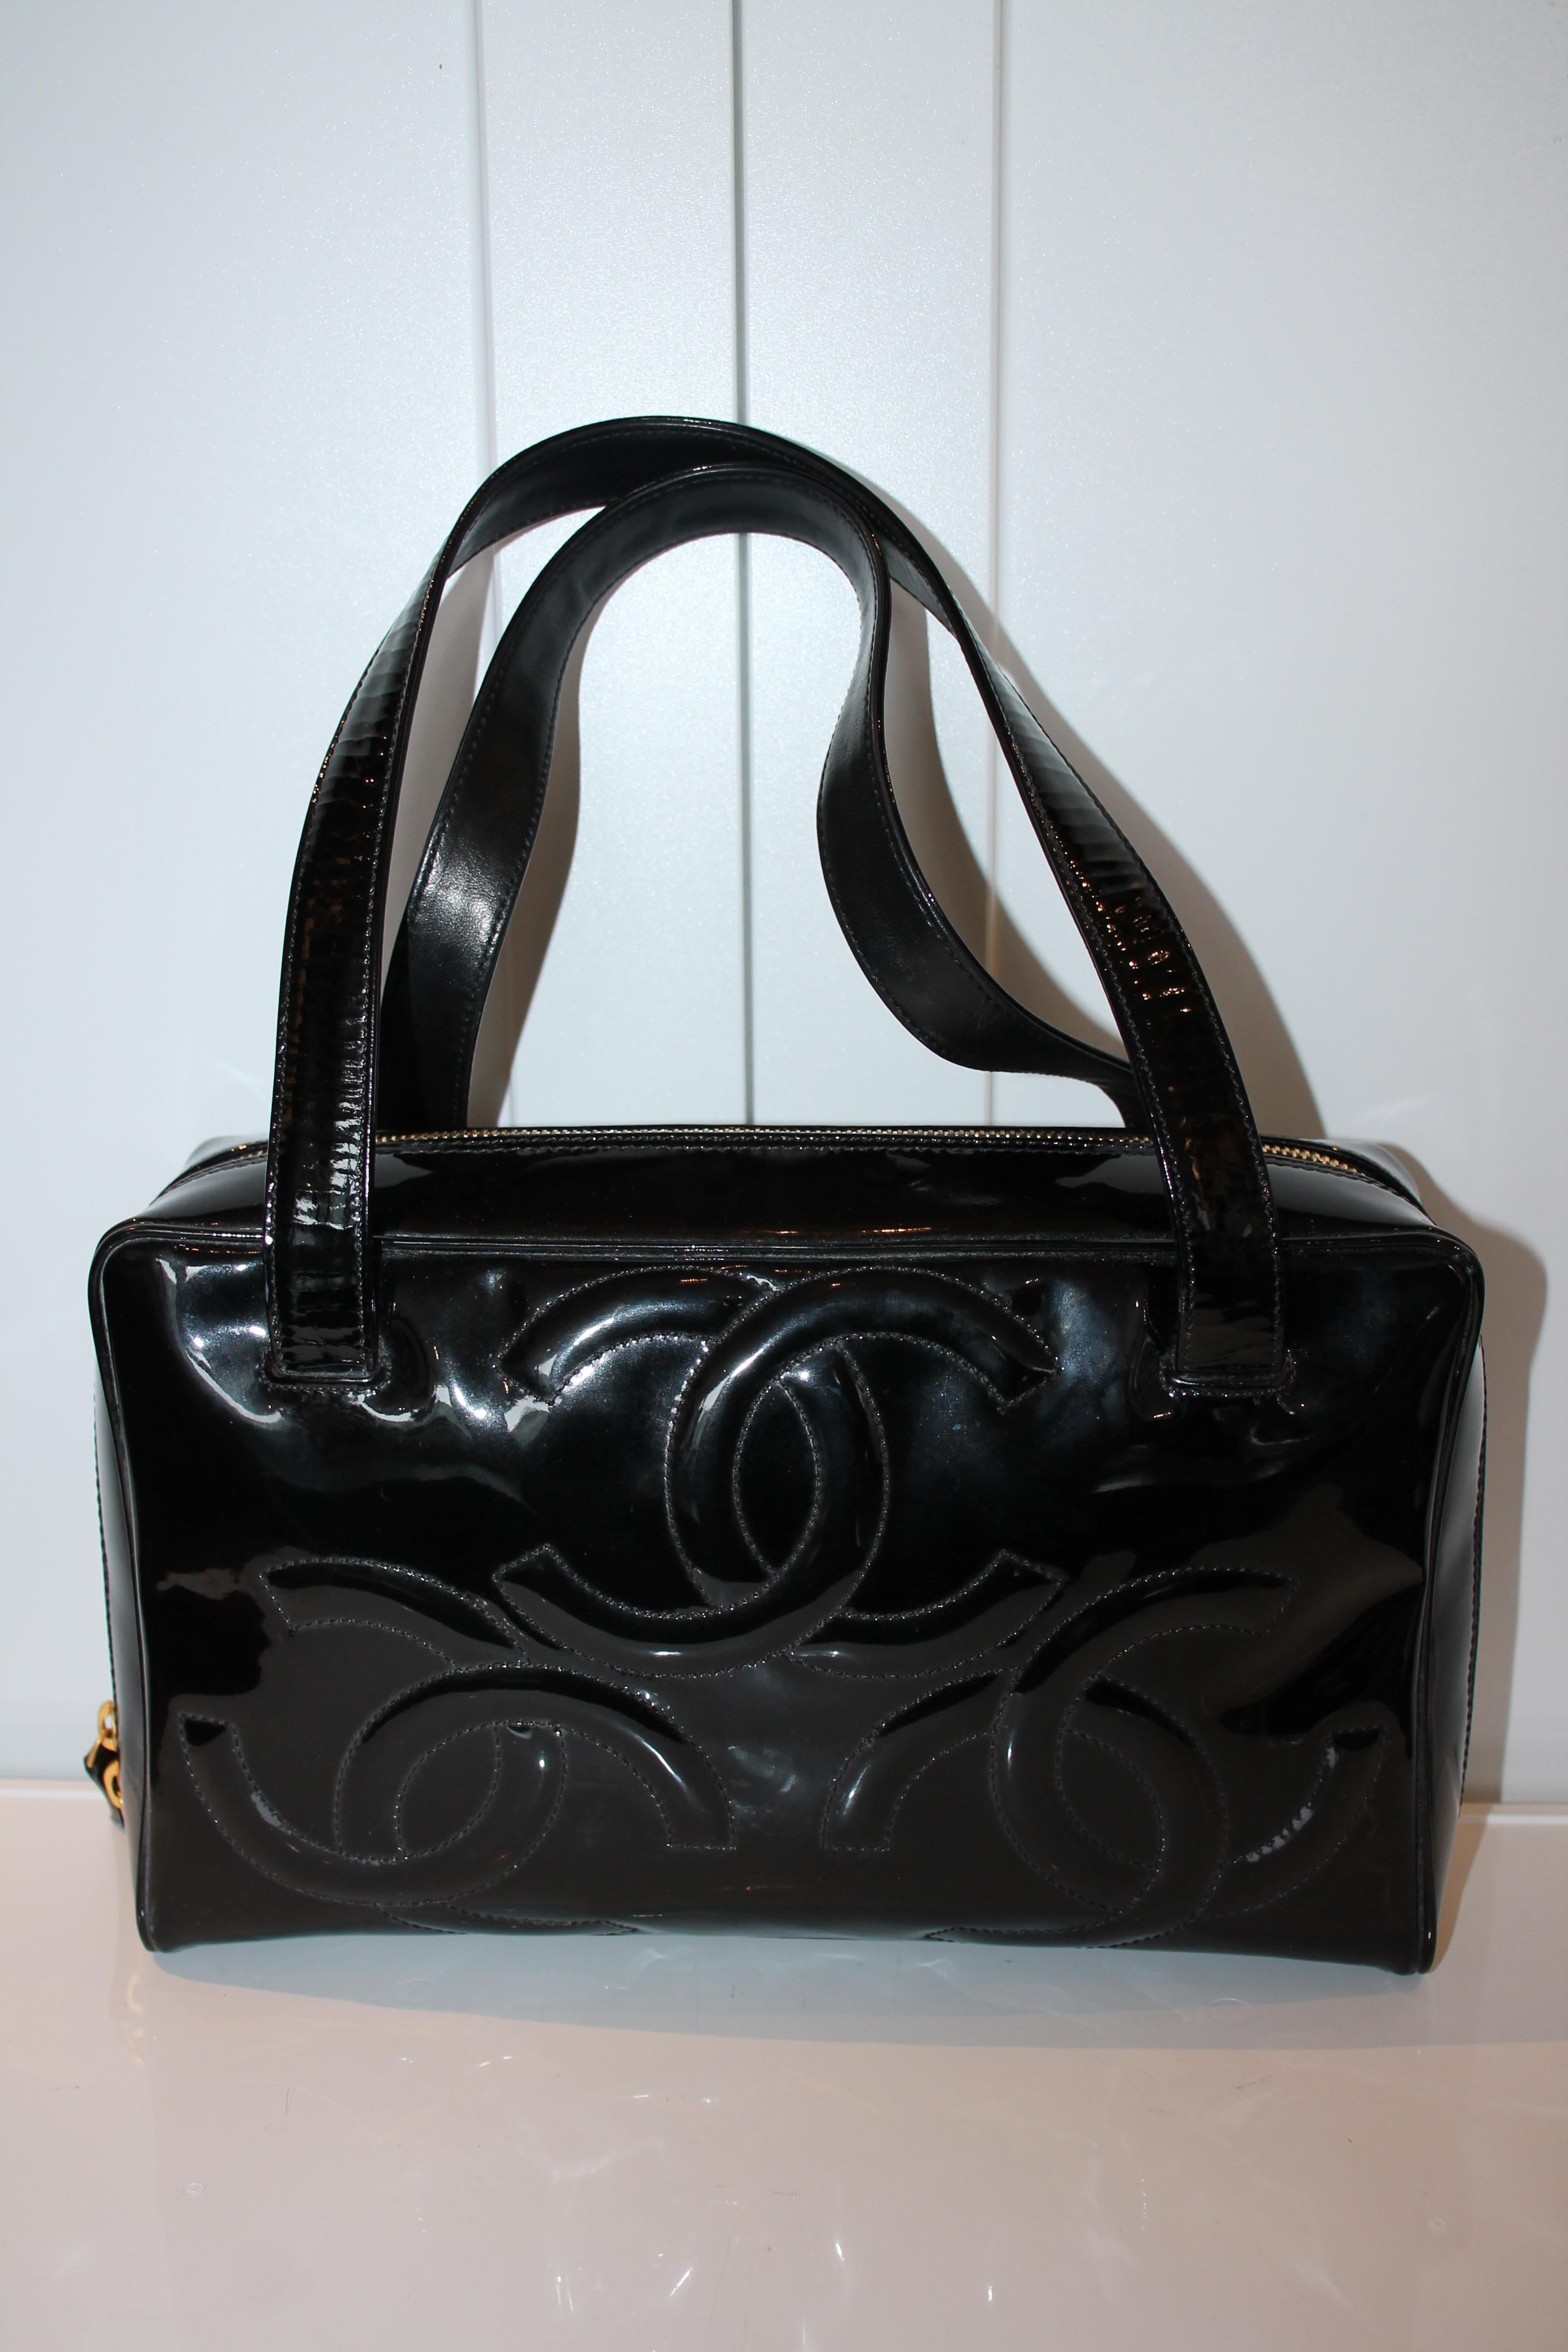 Chanel Black Patent Leather Quilted CC Logo Handbag In Good Condition For Sale In Roslyn, NY